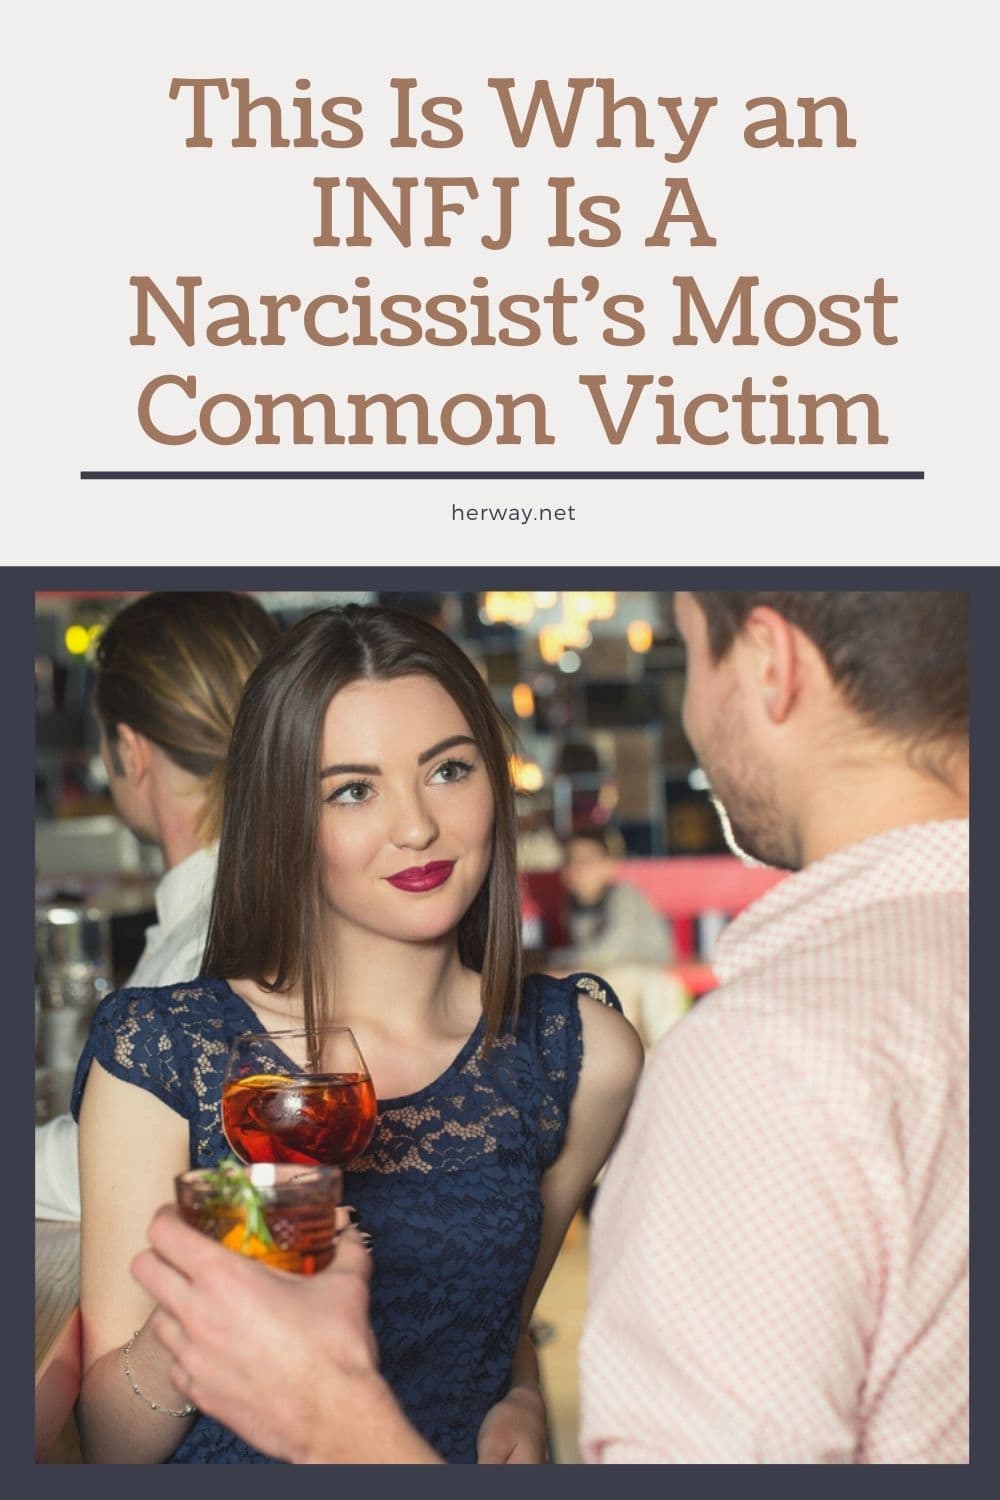 This Is Why an INFJ Is A Narcissist's Most Common Victim